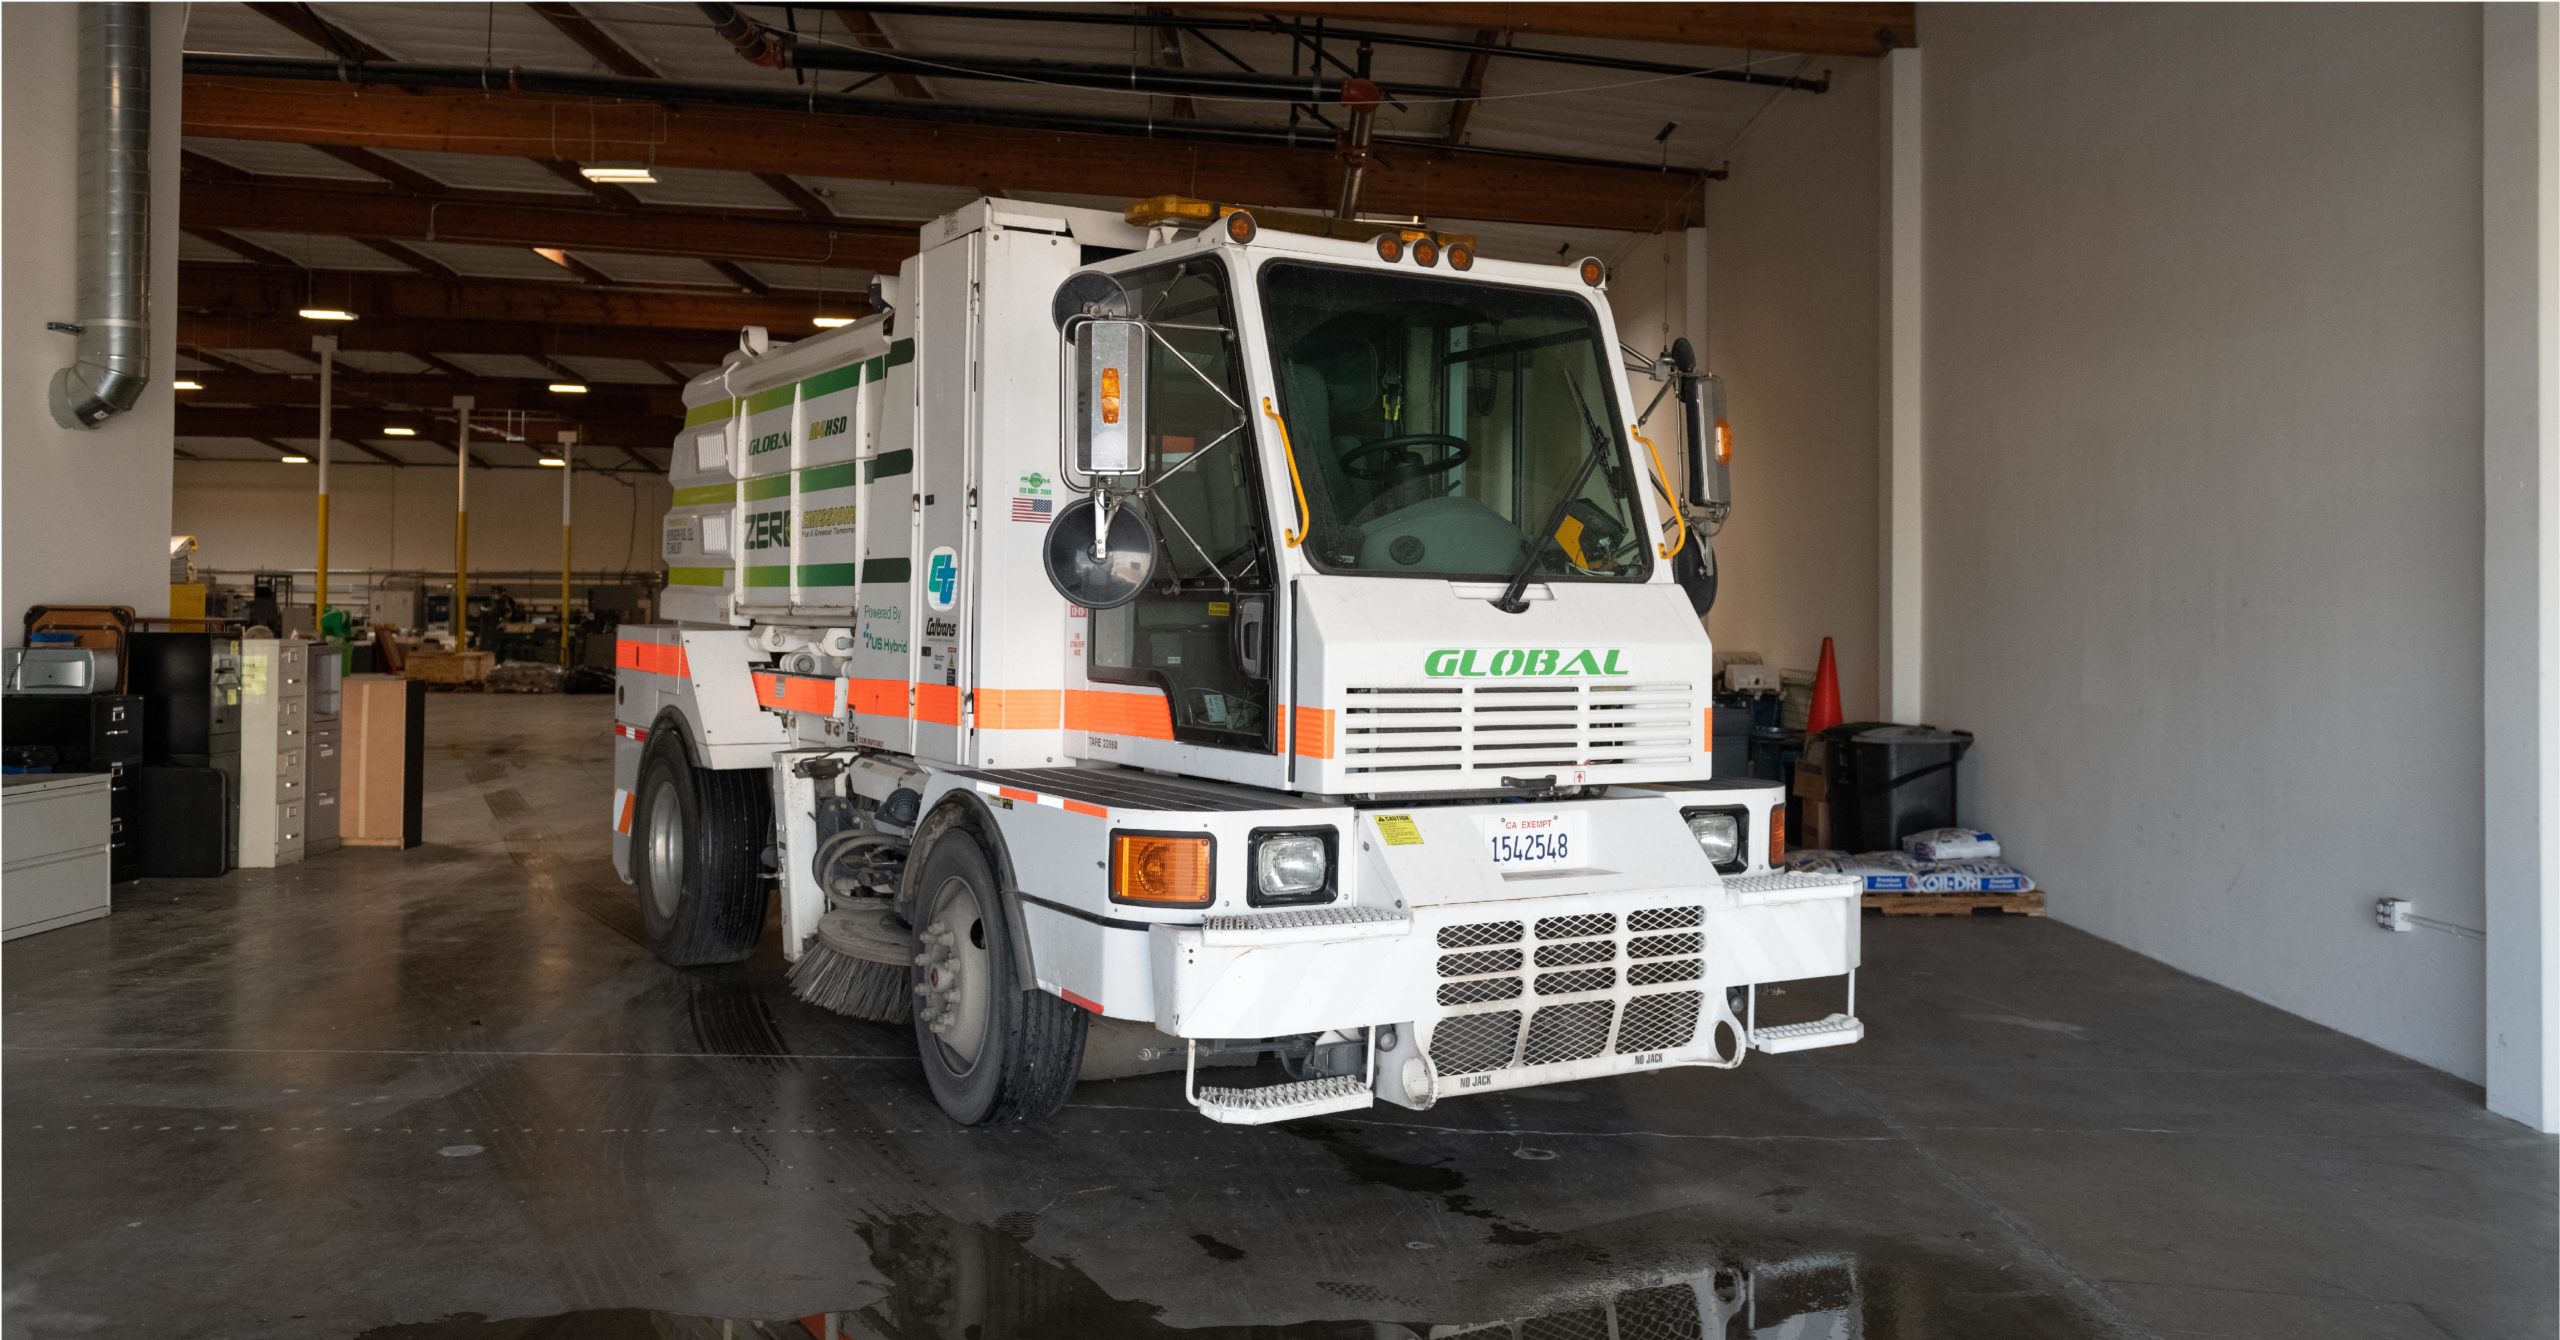 US Hybrid Receives $5.5 Million Purchase Order from Global Environmental Products to Electrify Street Sweepers for California and Other State Fleets